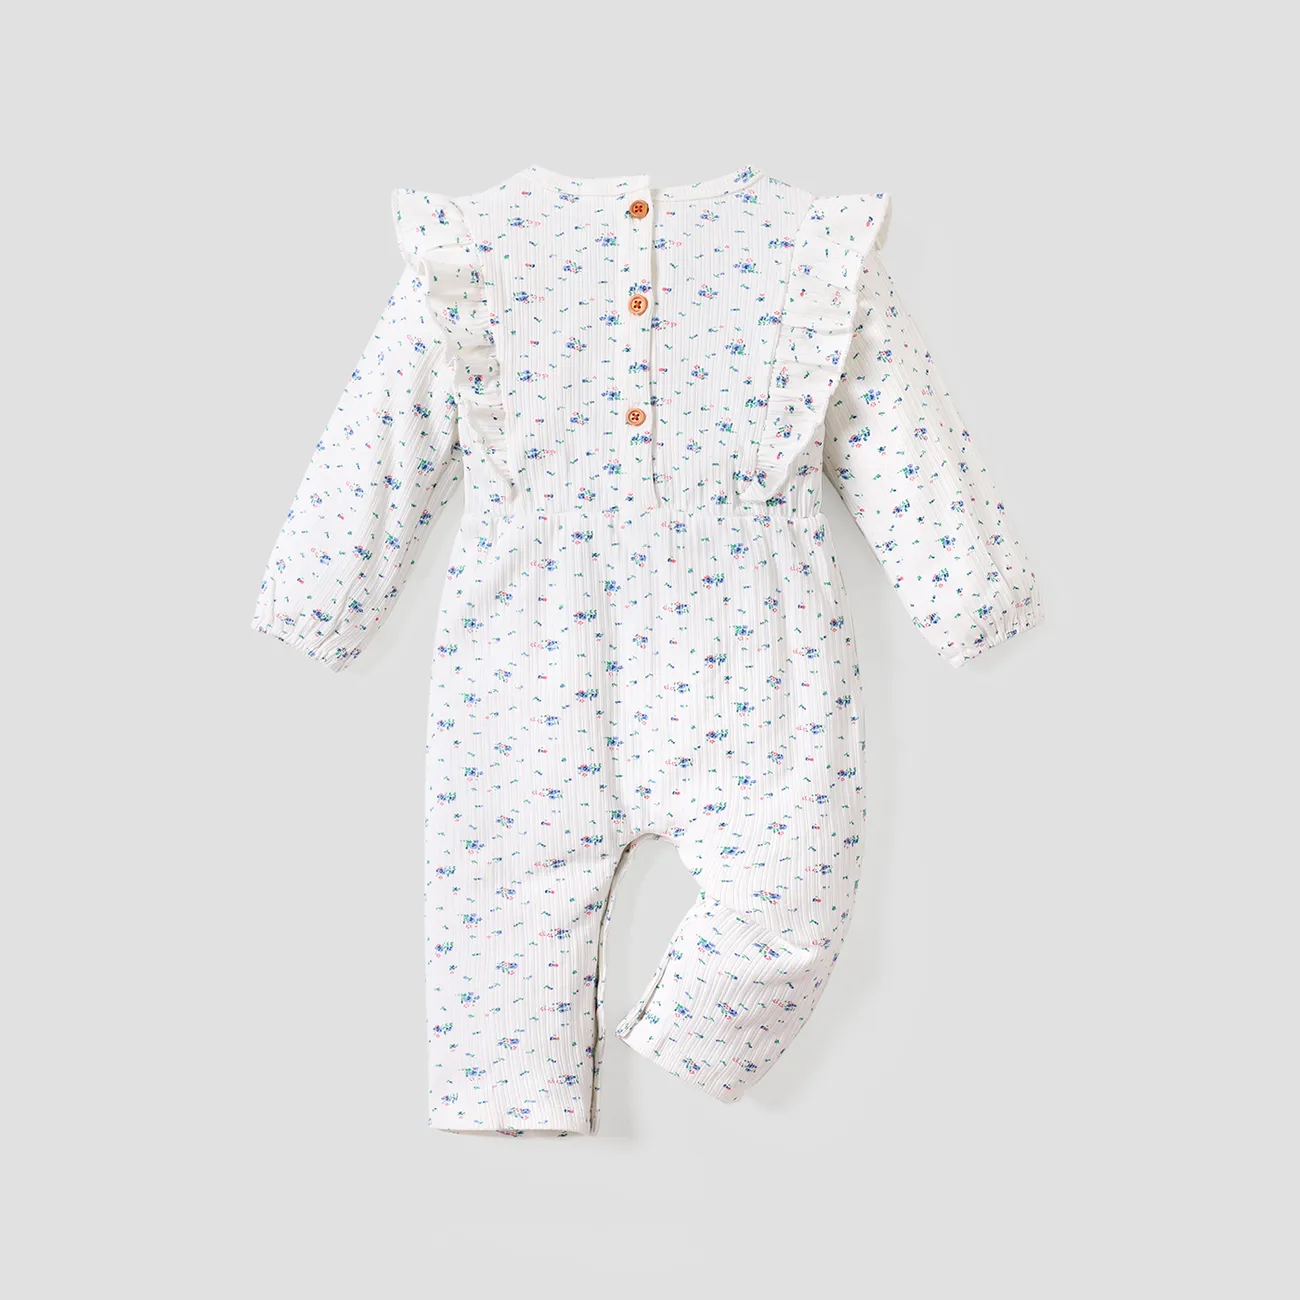 Ribbed Floral Allover Ruffle Decor Long-sleeve Baby Jumpsuit White big image 1